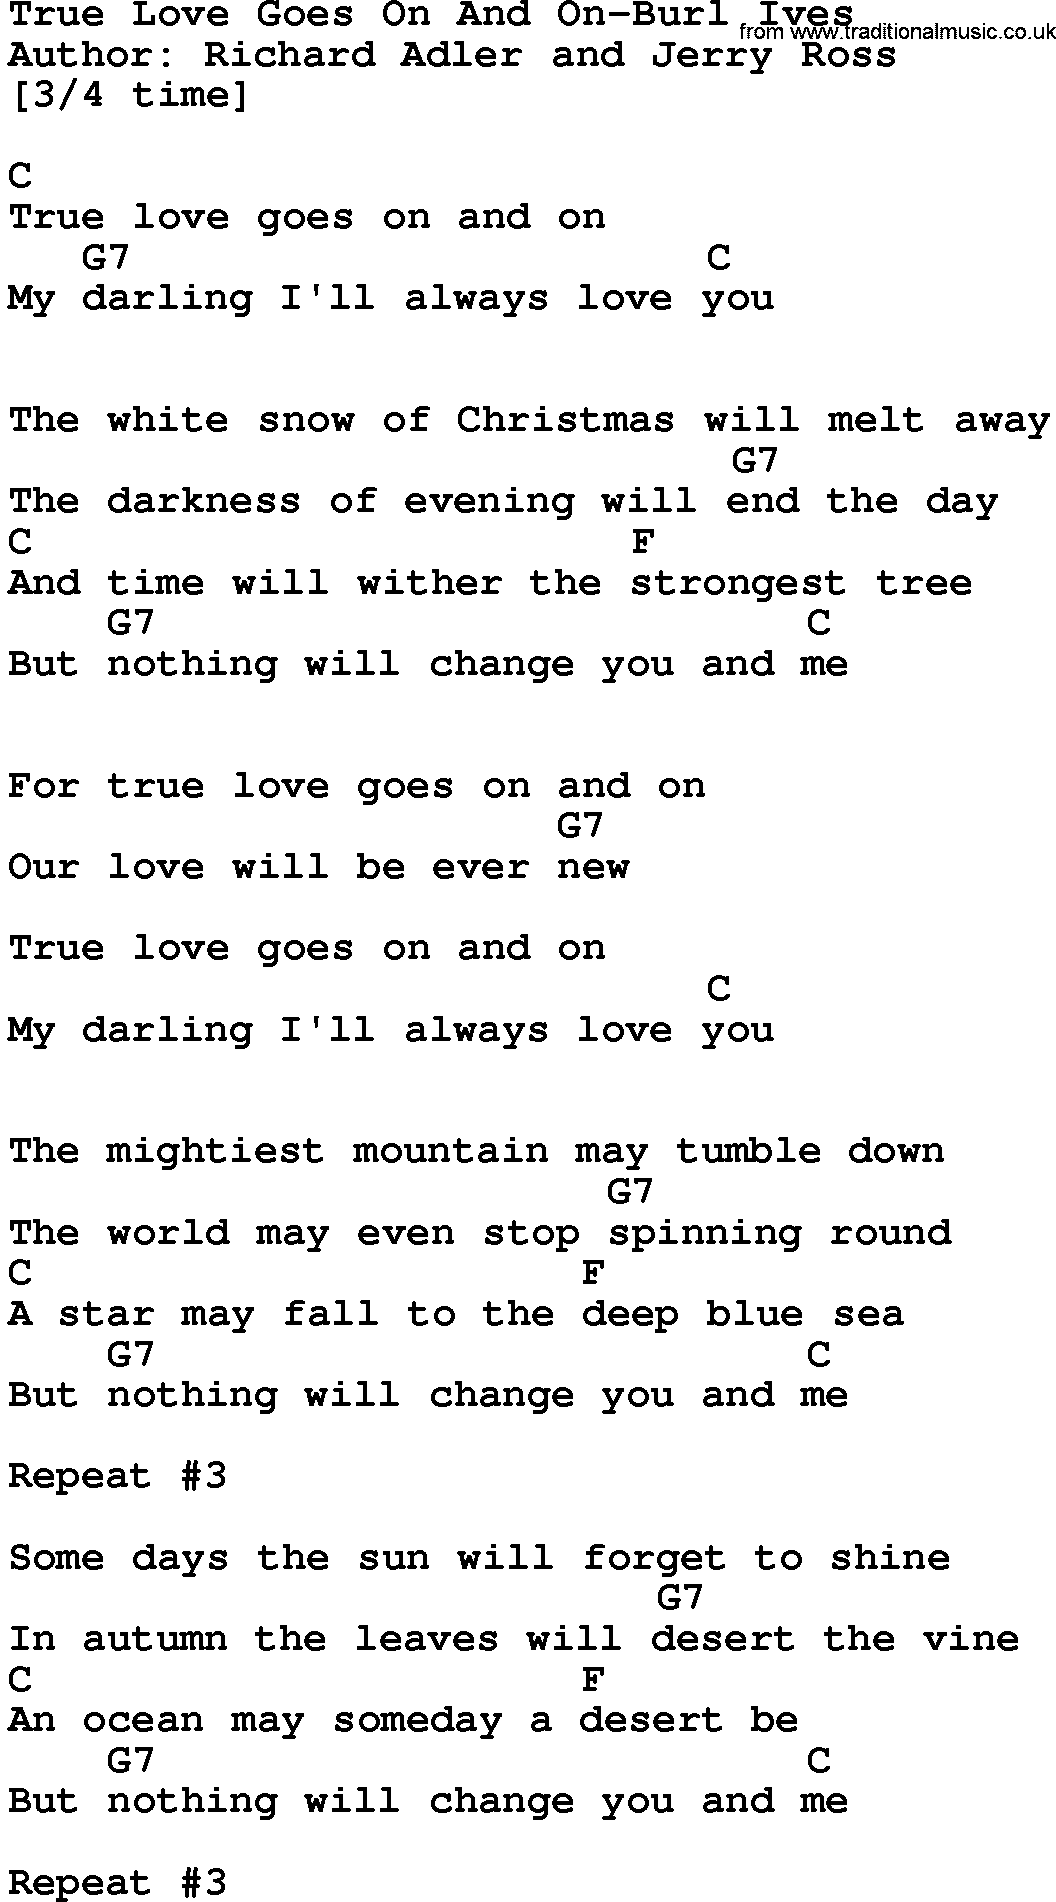 Country music song: True Love Goes On And On-Burl Ives lyrics and chords